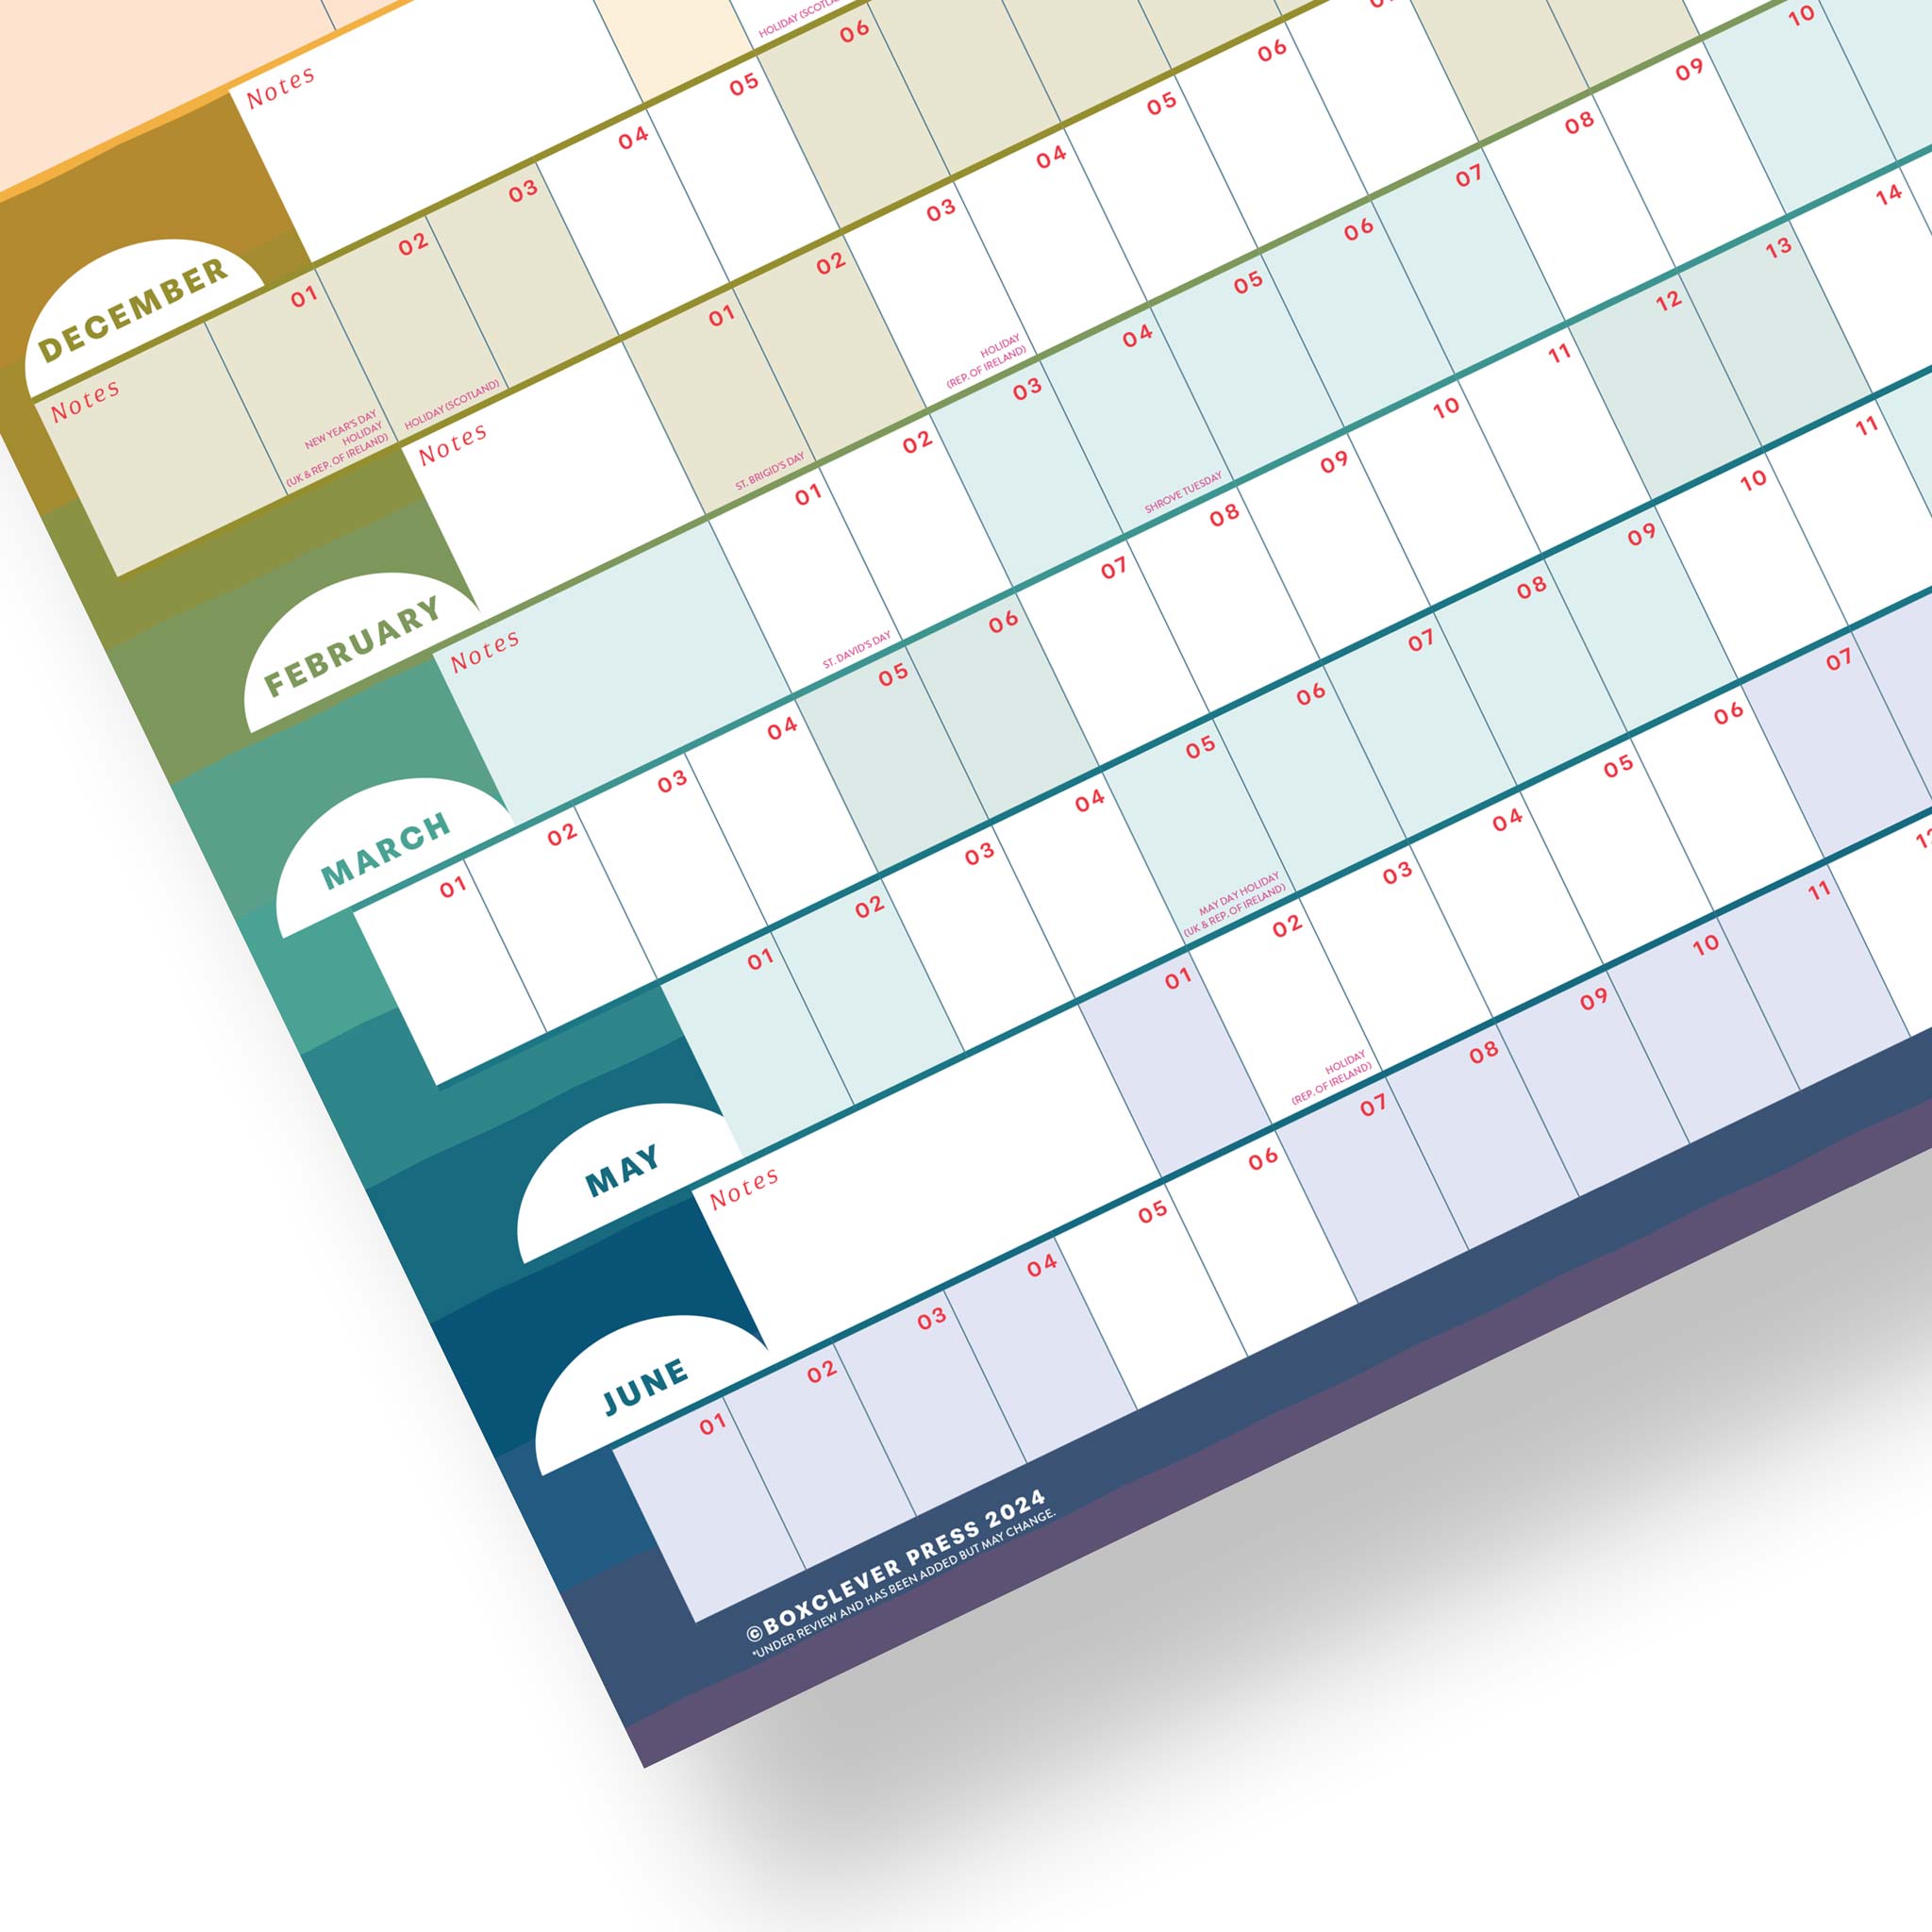 The bottom corner of a wall planner showing note boxes, shaded weekends and colourful pattern